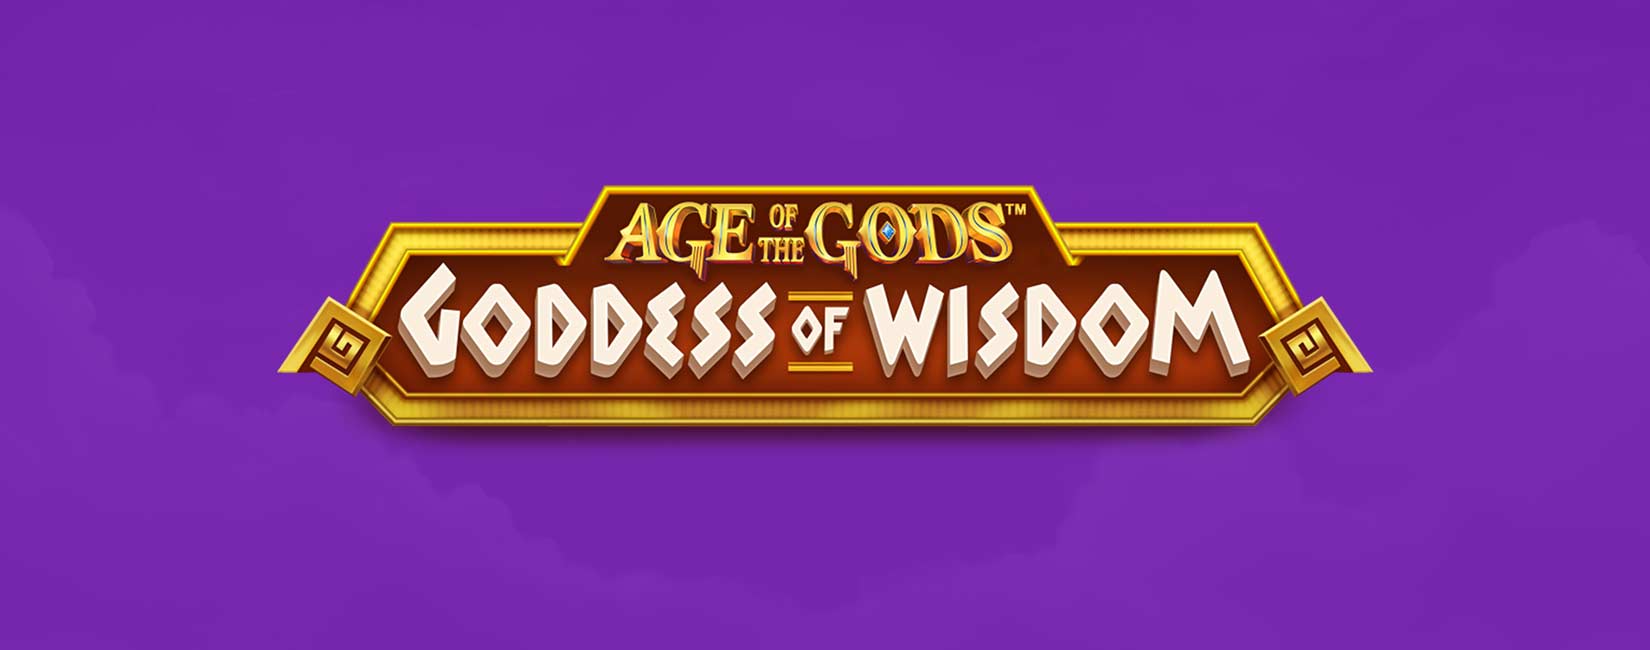 CRE-292759-GC-February reviews Age of the gods goddess of wisdom slot-Page Banner-1650x650